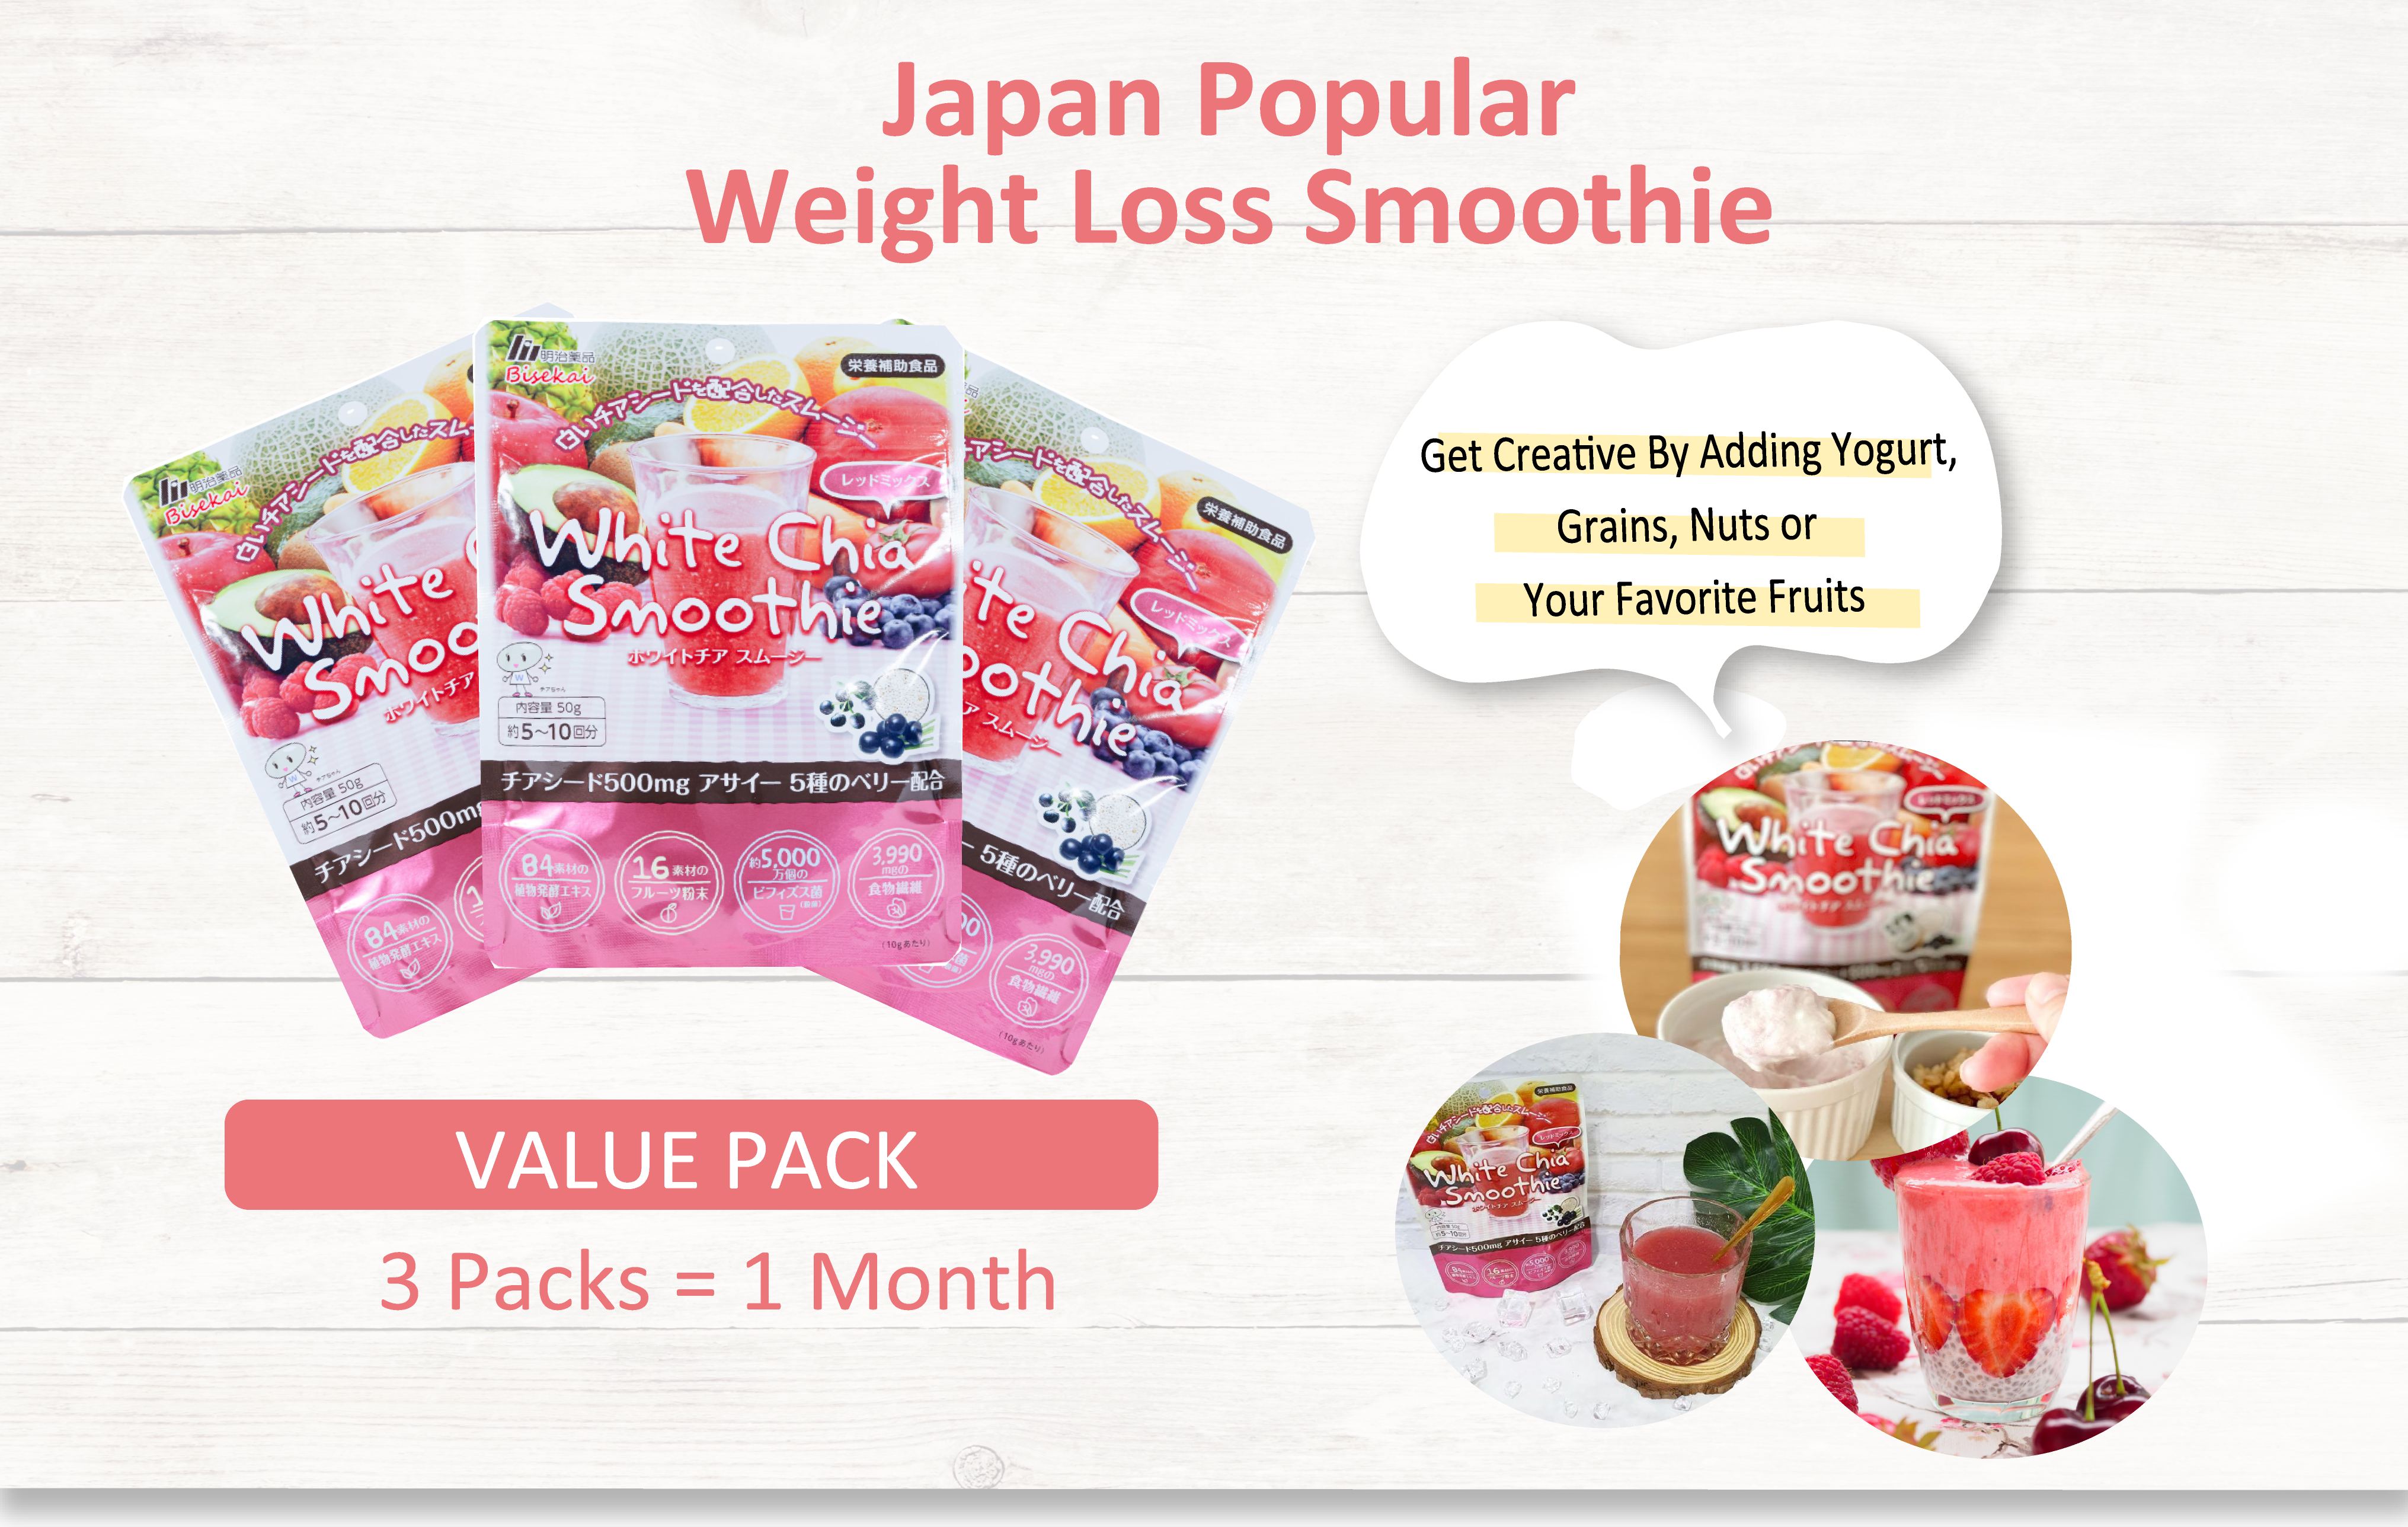 Japan Popular Weight Loss Smoothie